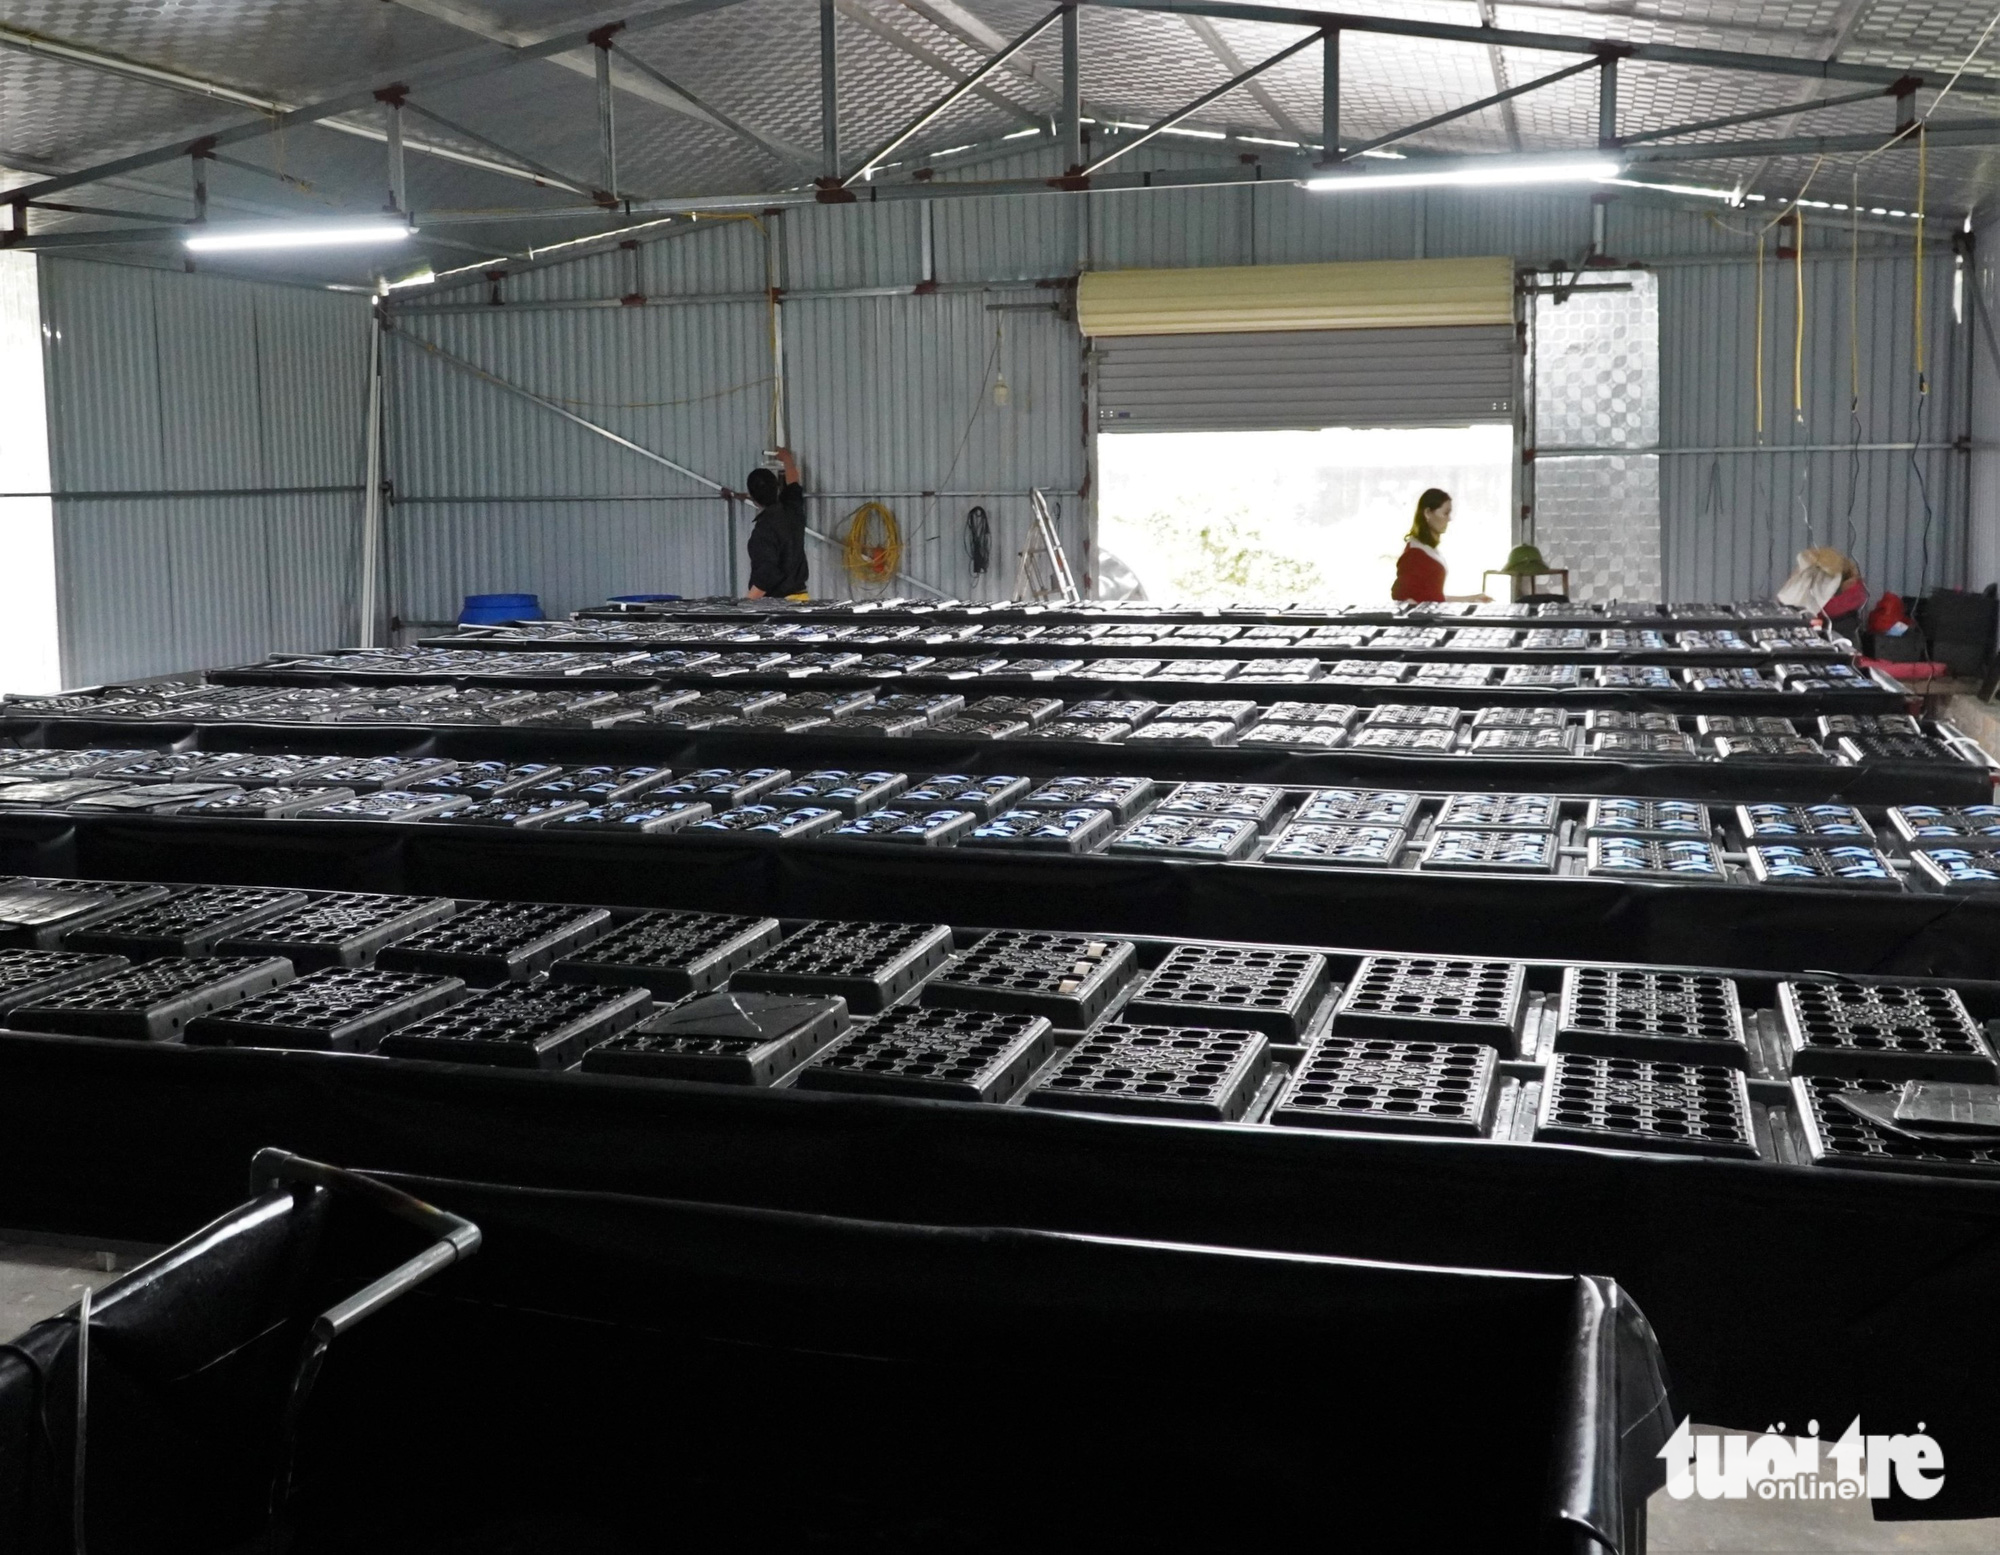 Crabs are raised in plastic boxes at Pham Thanh Son’s farm in Nghi Xuan District, Ha Tinh Province, Vietnam. Photo: Le Minh / Tuoi Tre